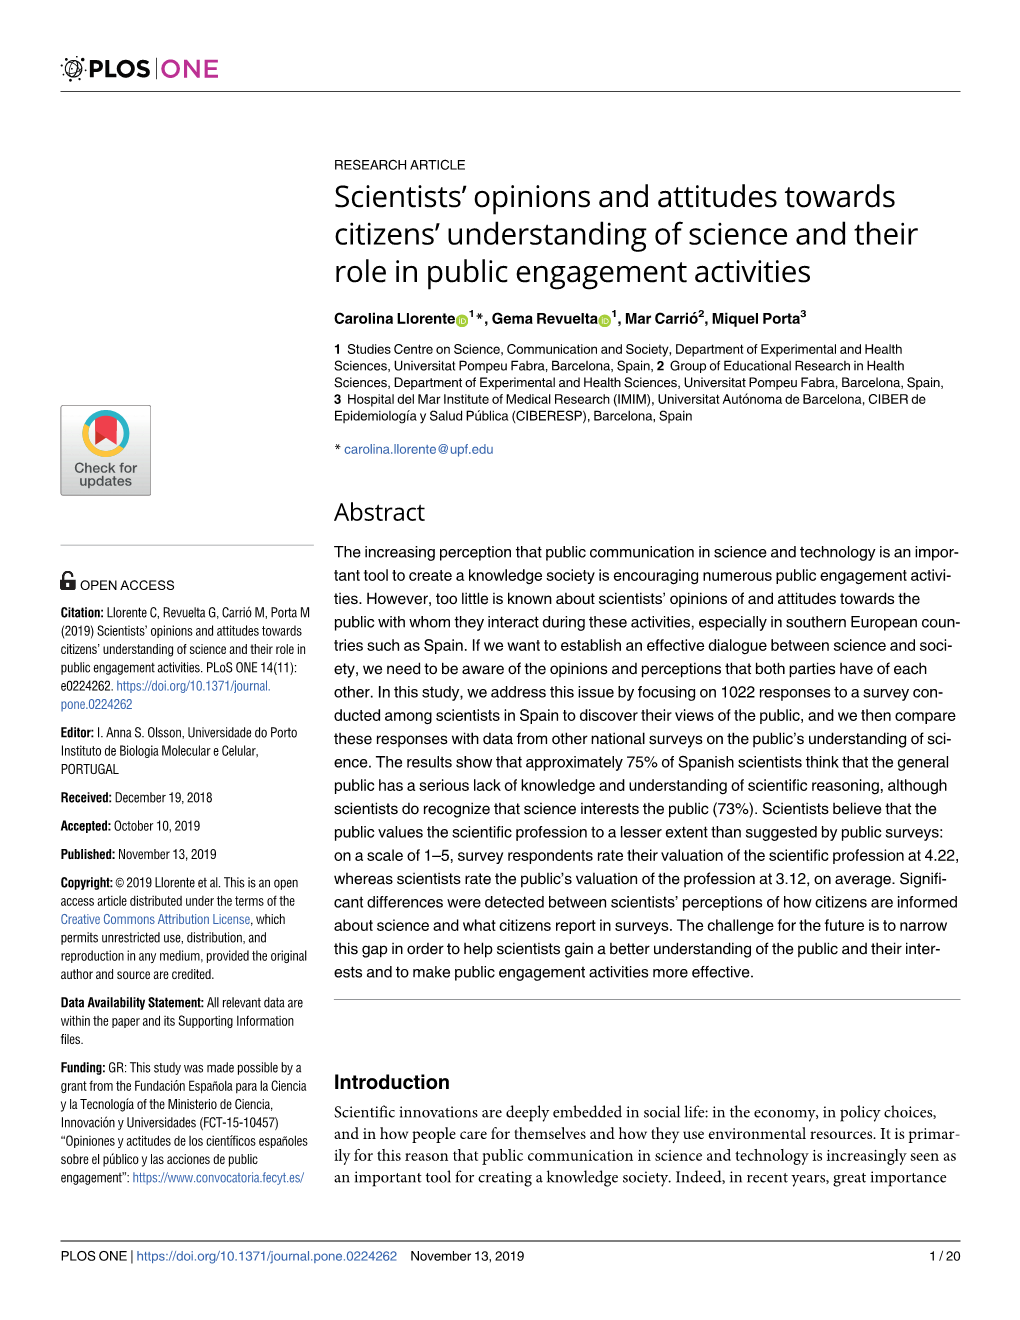 Scientists' Opinions and Attitudes Towards Citizens' Understanding of Science and Their Role in Public Engagement Activities